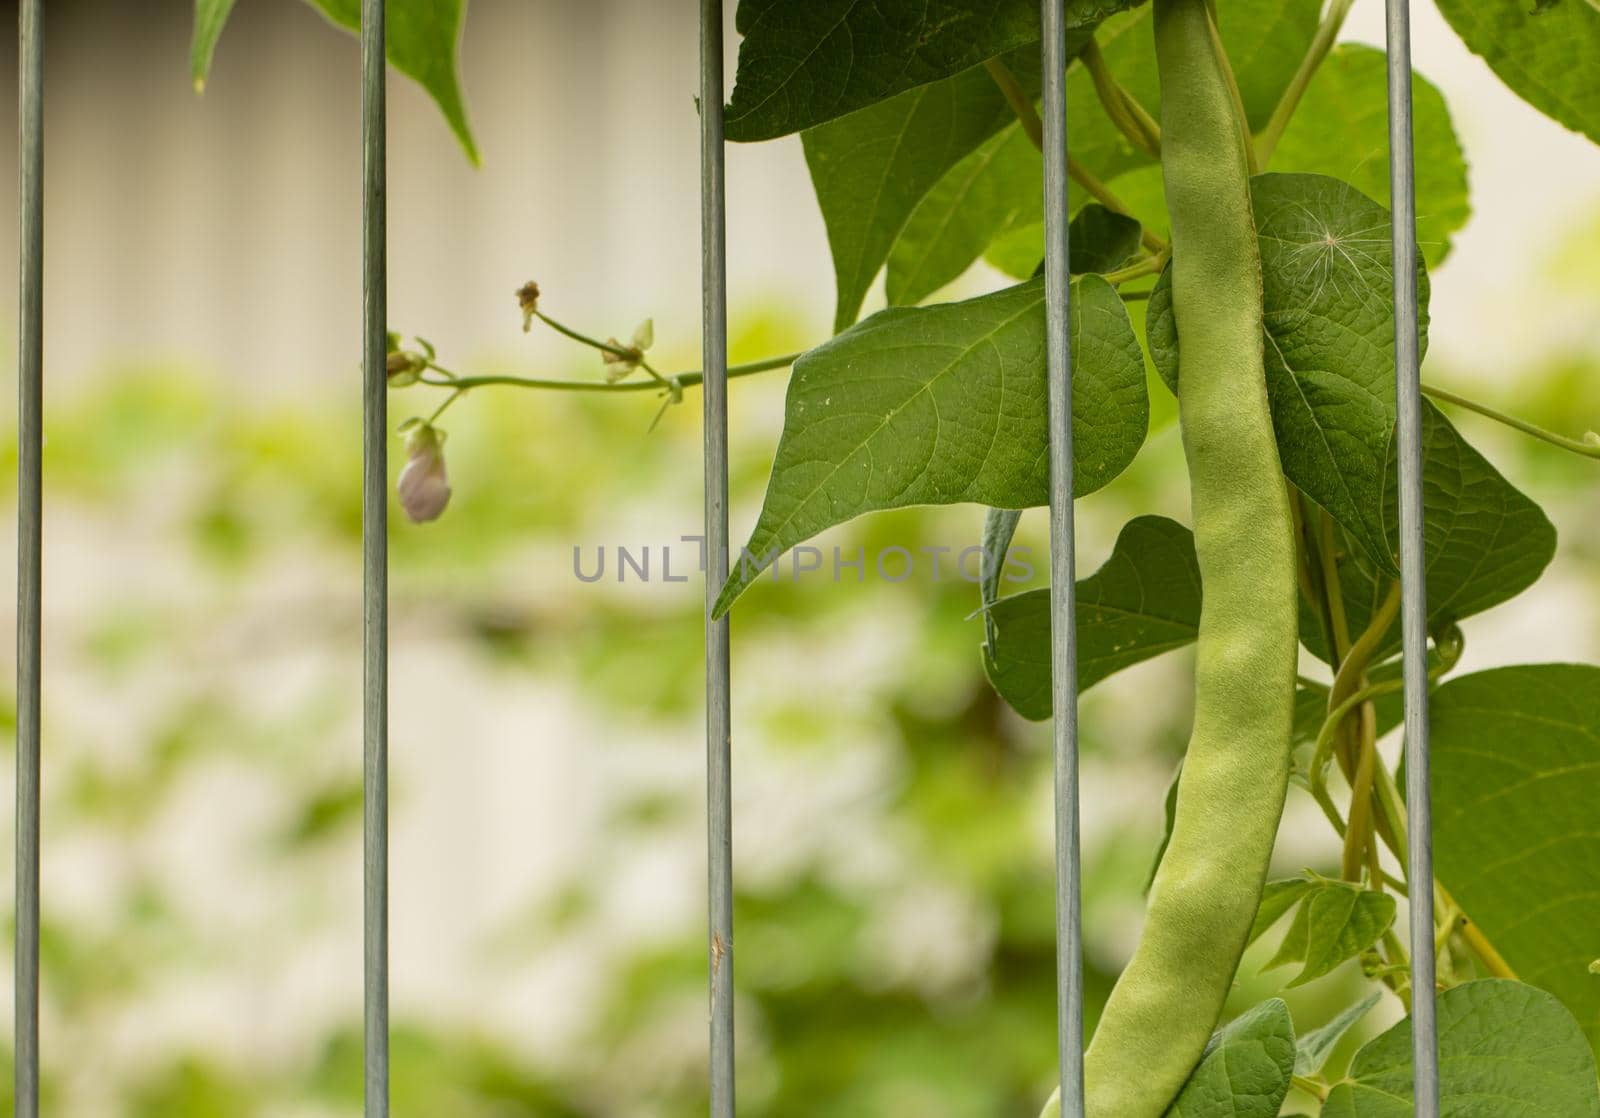 Beans grow on the fence, climbing plant by Mindru